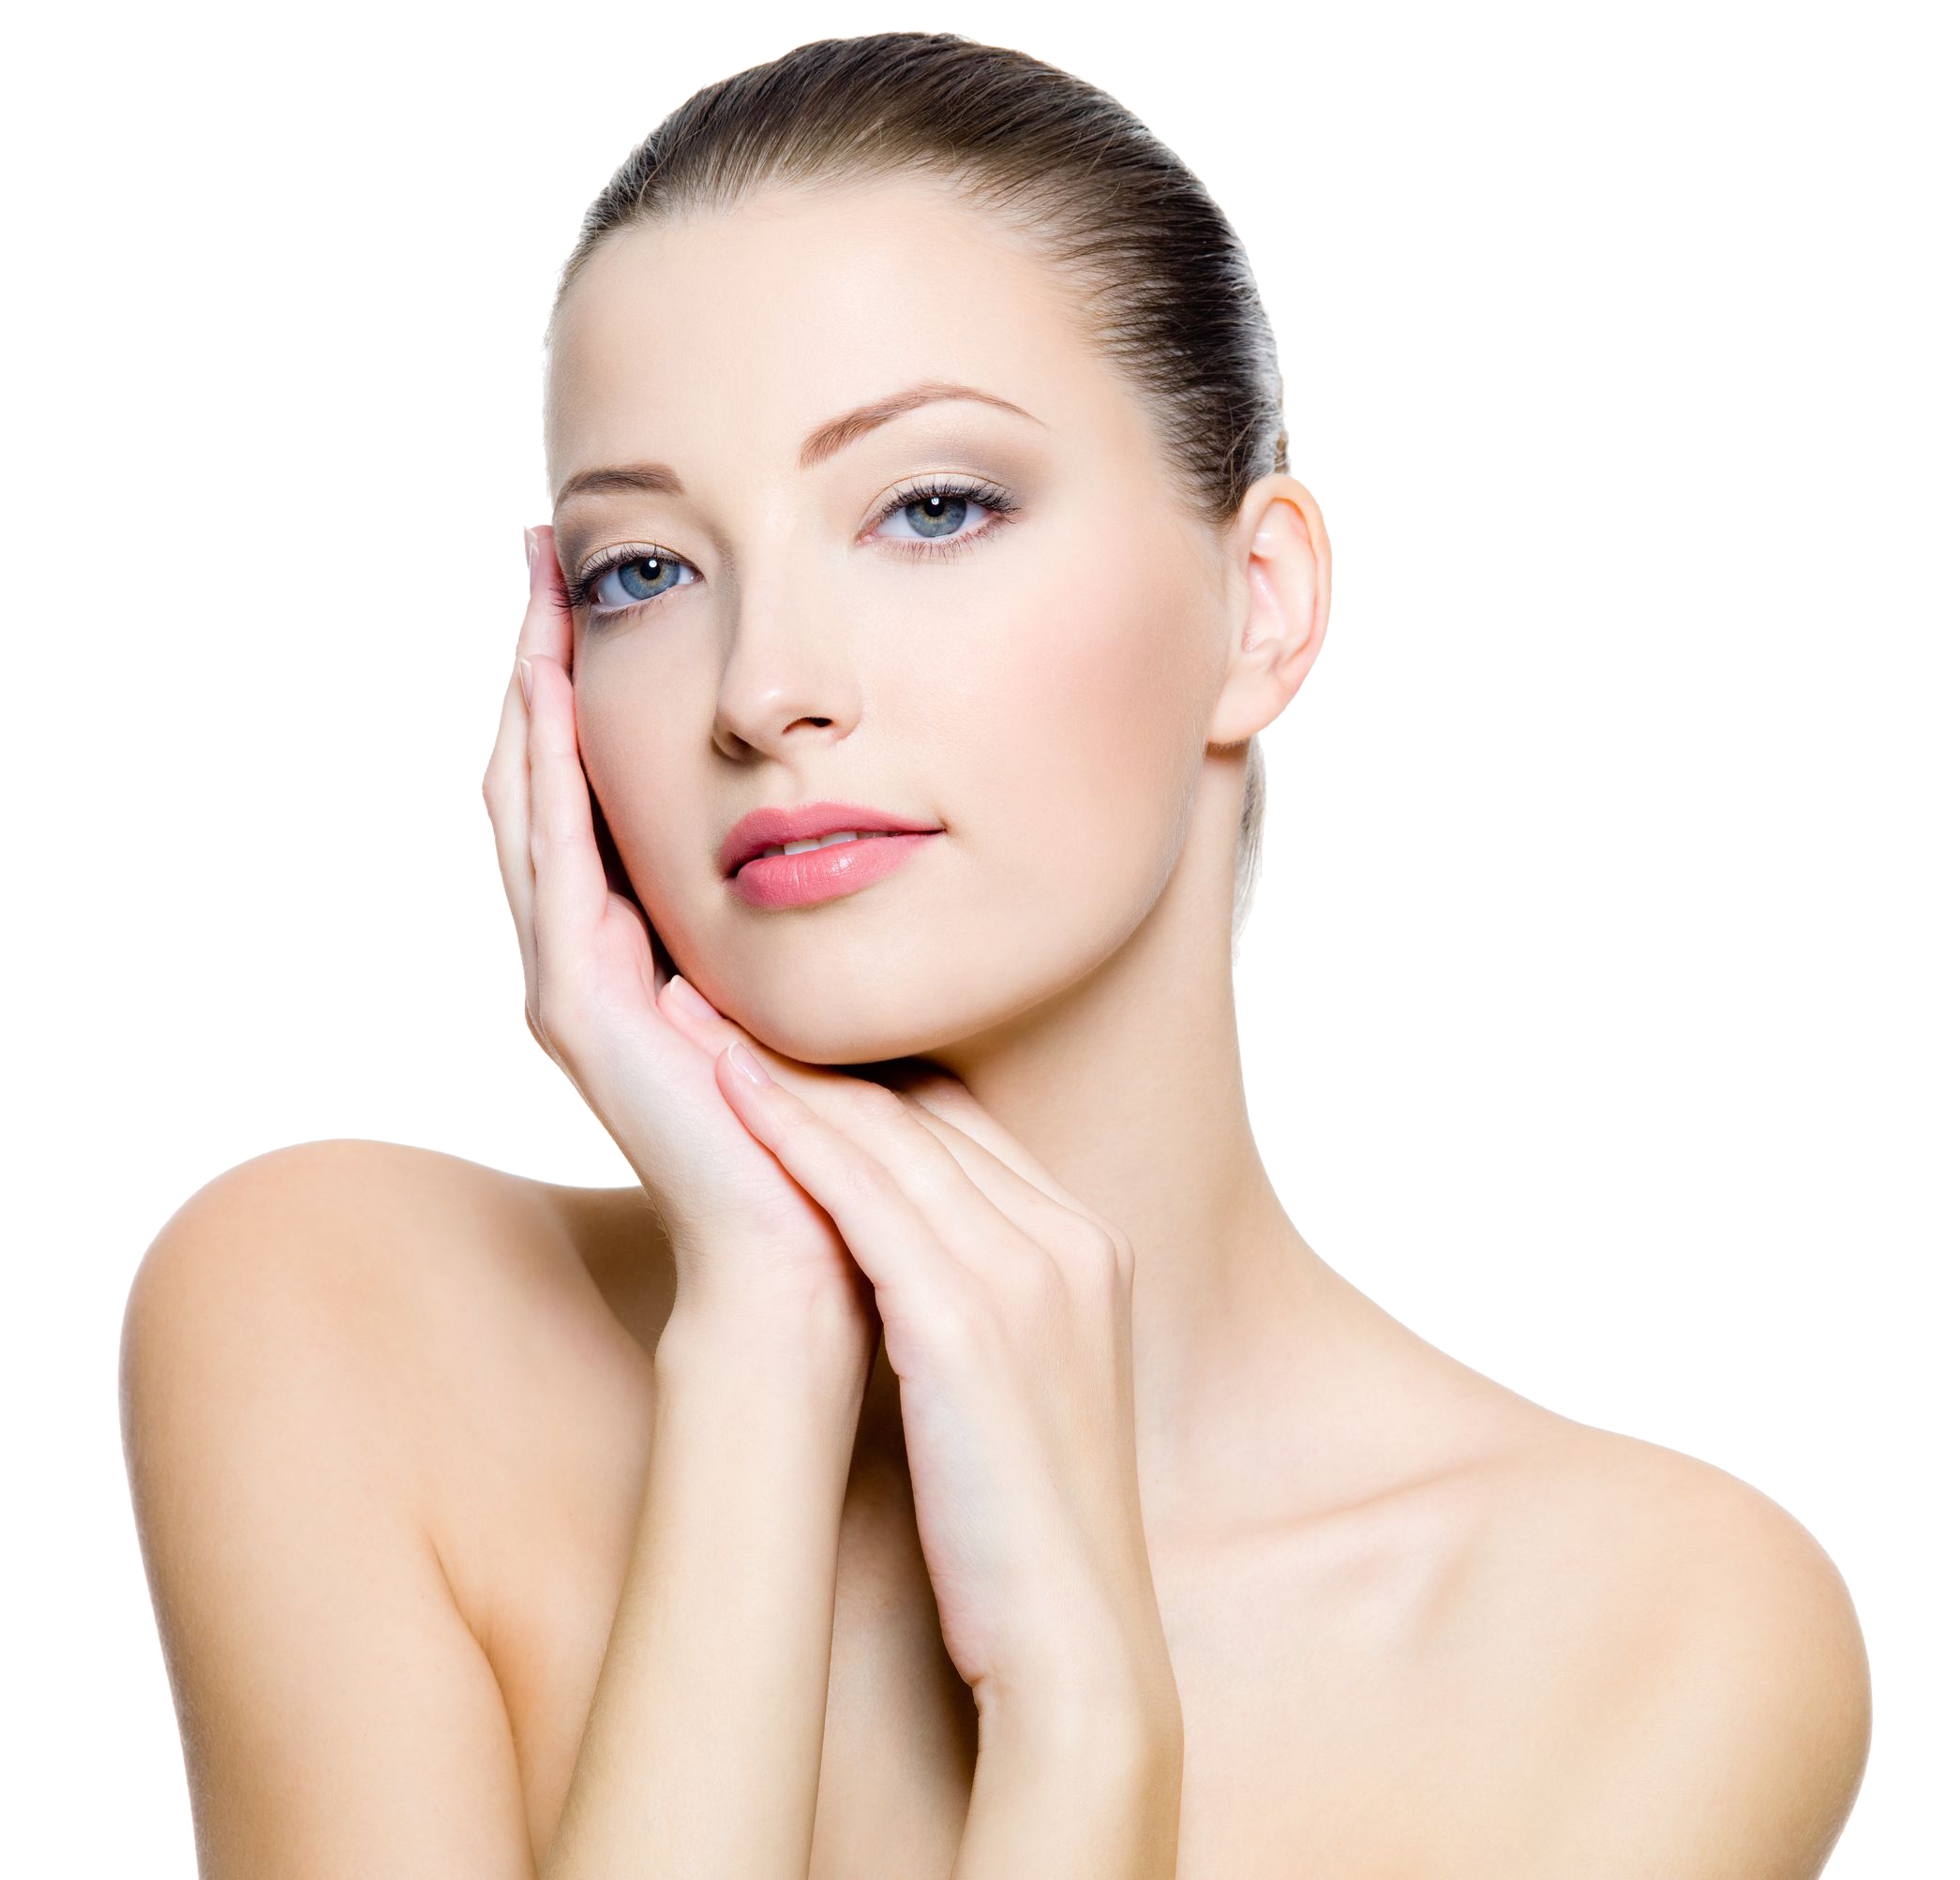 Facial laser hair removal: cost, procedures, etc.